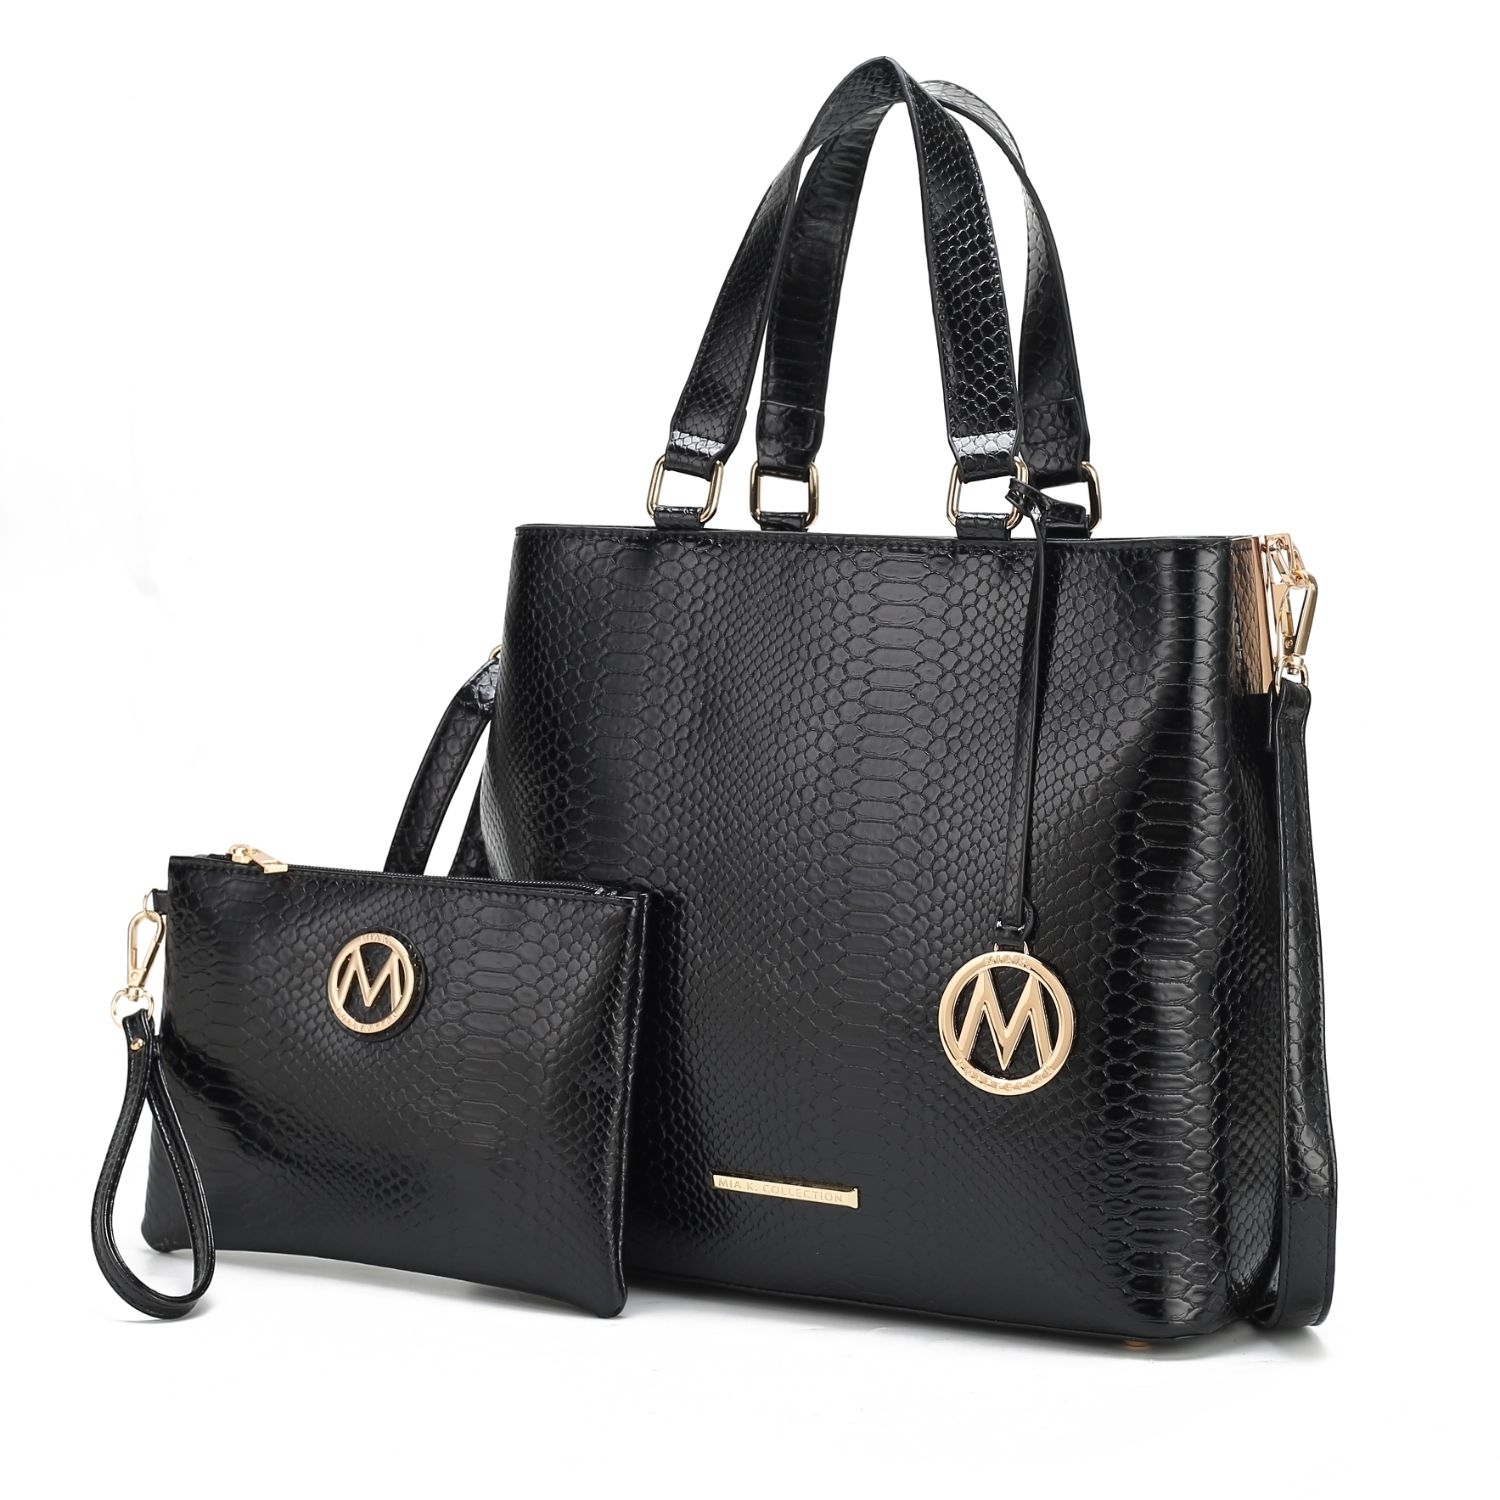 MKF Collection Beryl Snake-embossed Vegan Leather Women's Tote Bag With Wristlet - 2 Pieces, By Mia K - Denim